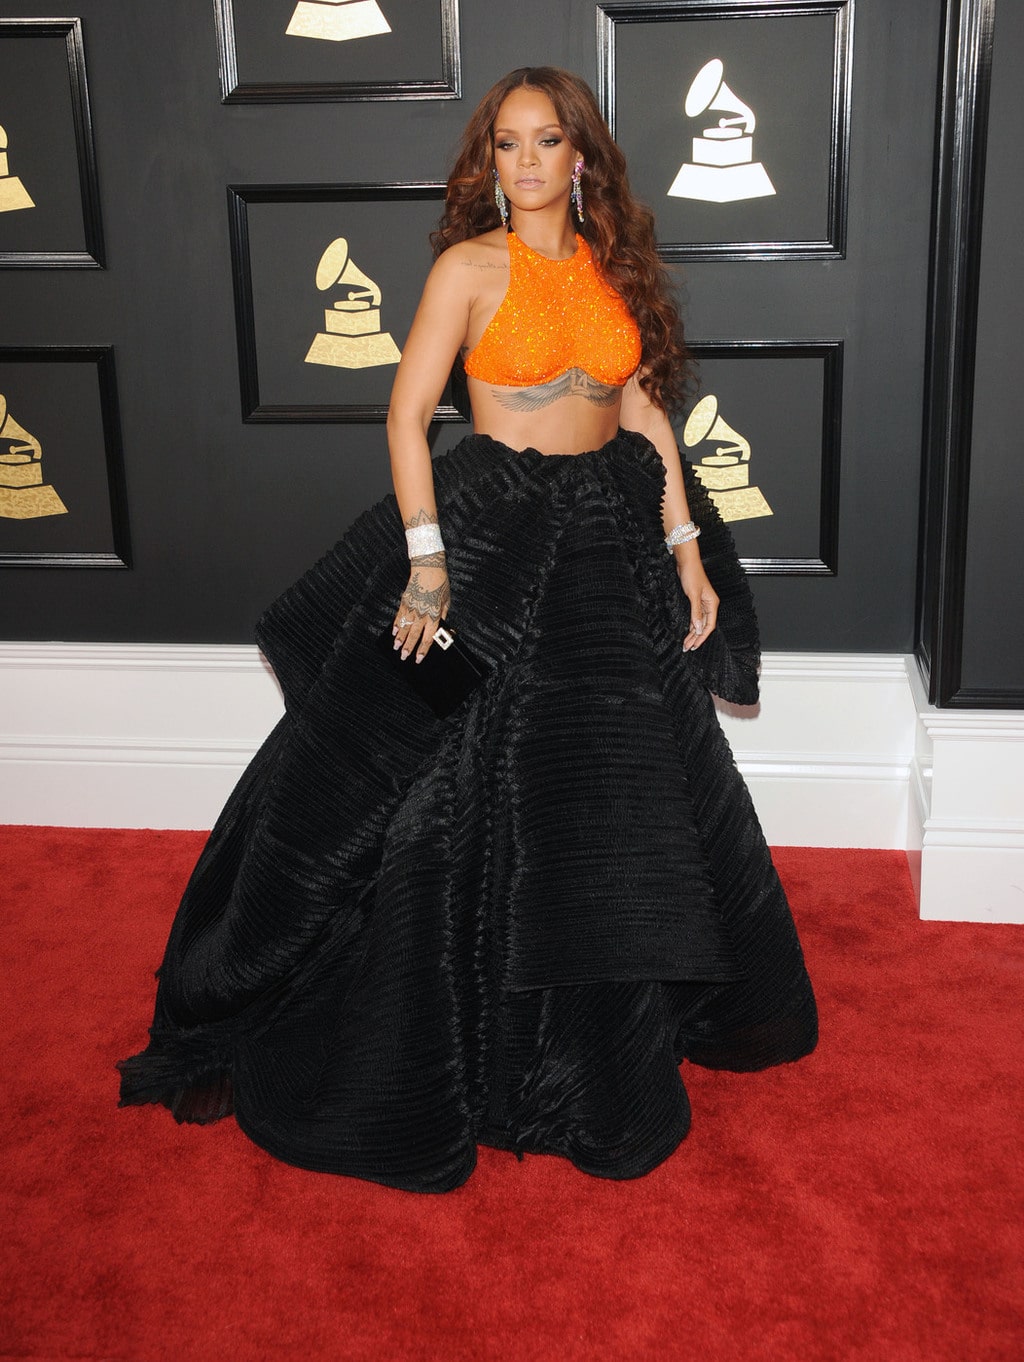 Rihanna in Armani Prive orange crop top and black skirt at the 2017 Grammy Awards